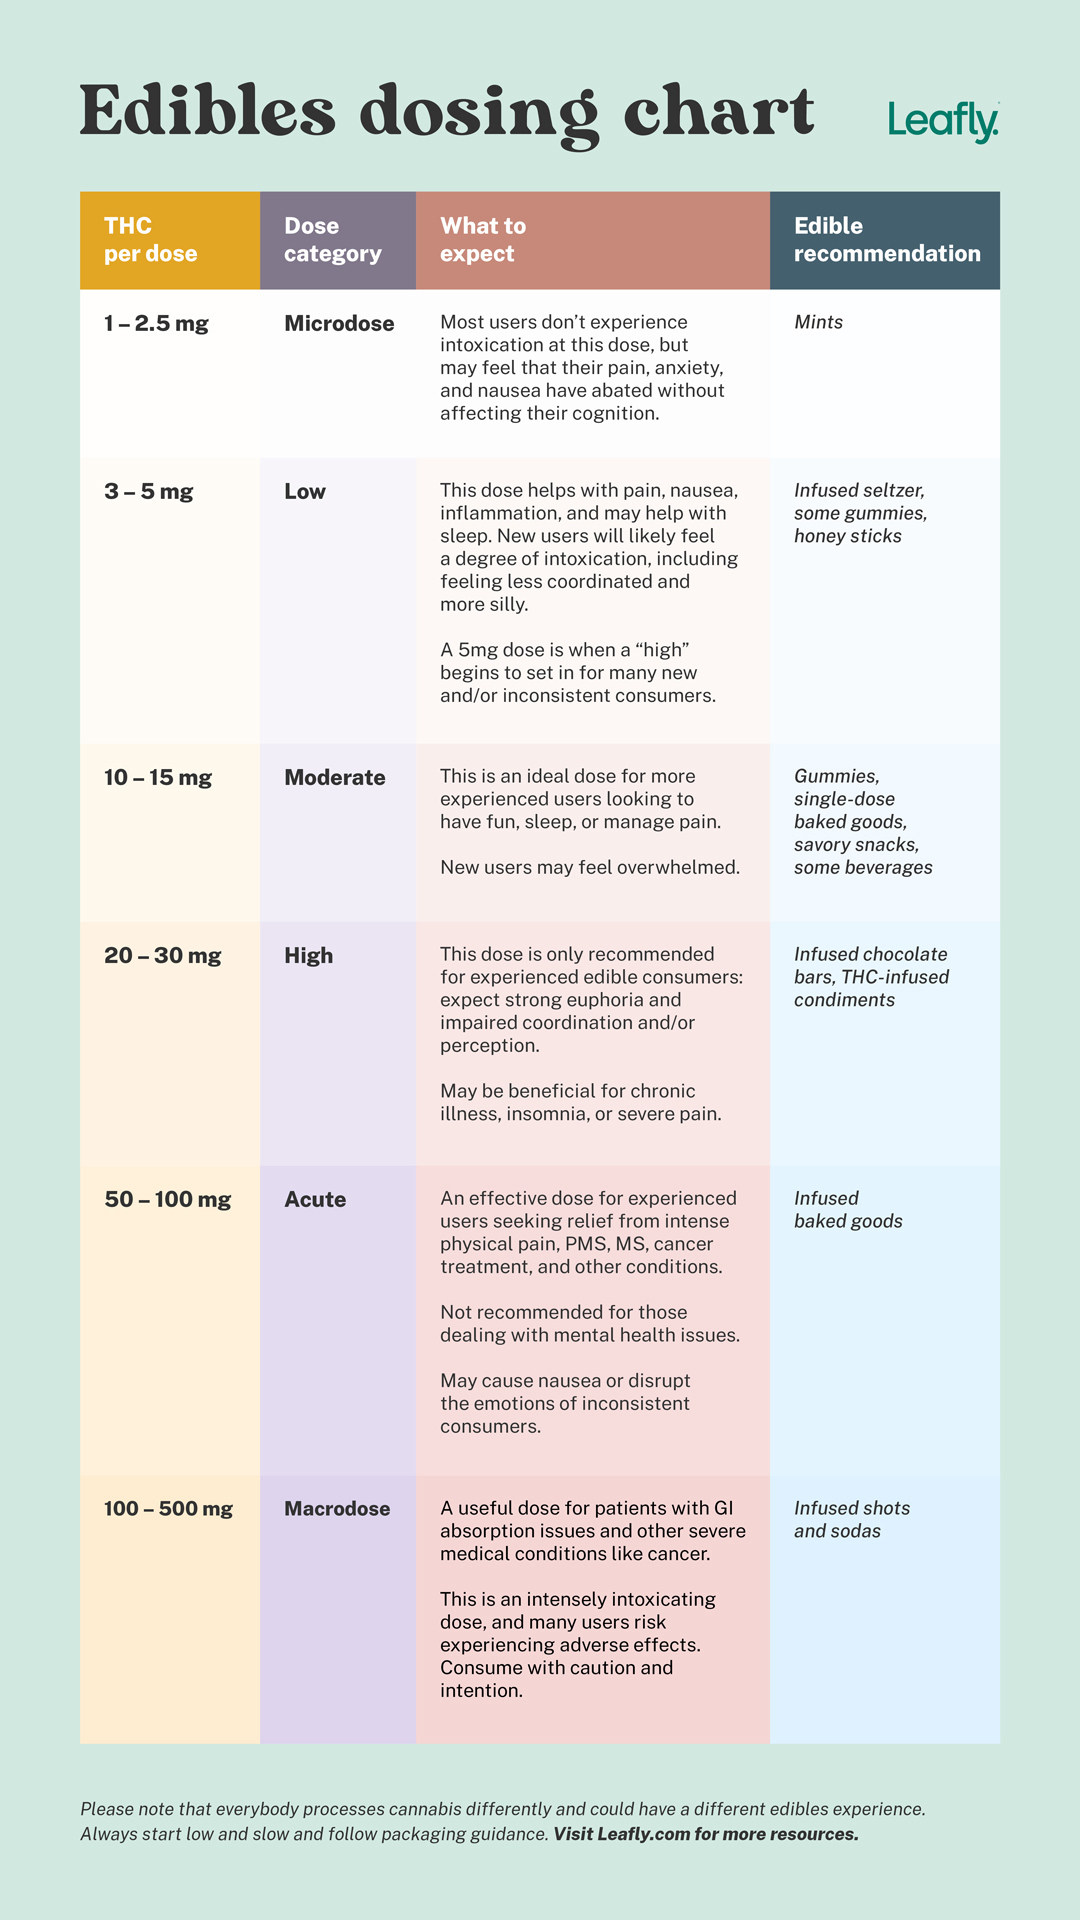 edibles-dosage-chart-by-mg-of-thc-leafly